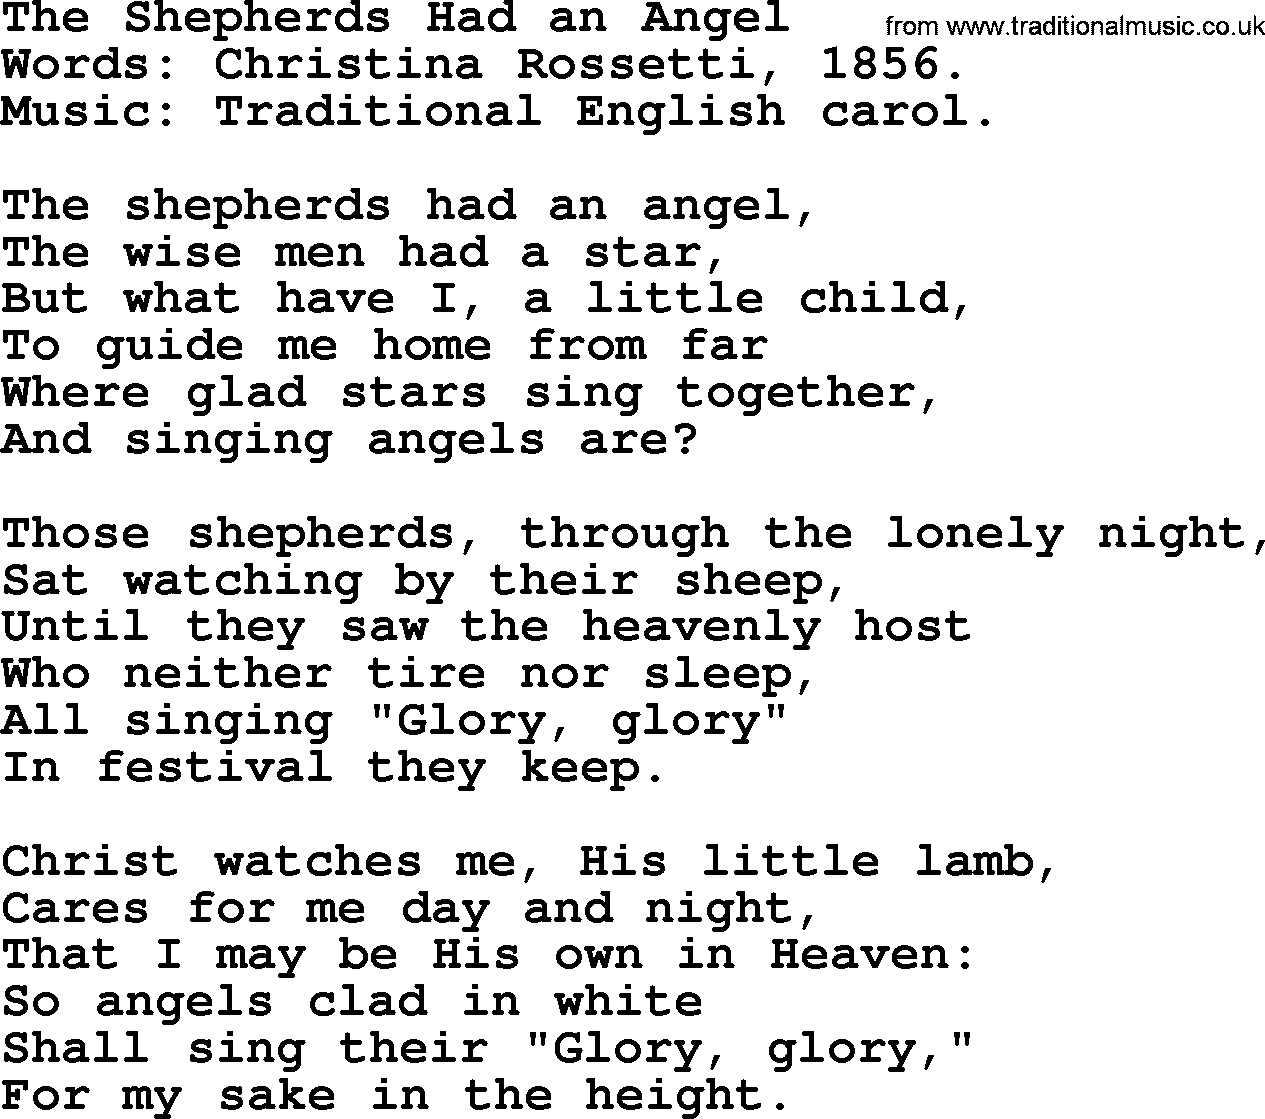 280 Christmas Hymns and songs with PowerPoints and PDF, title: The Shepherds Had An Angel, lyrics, PPT and PDF